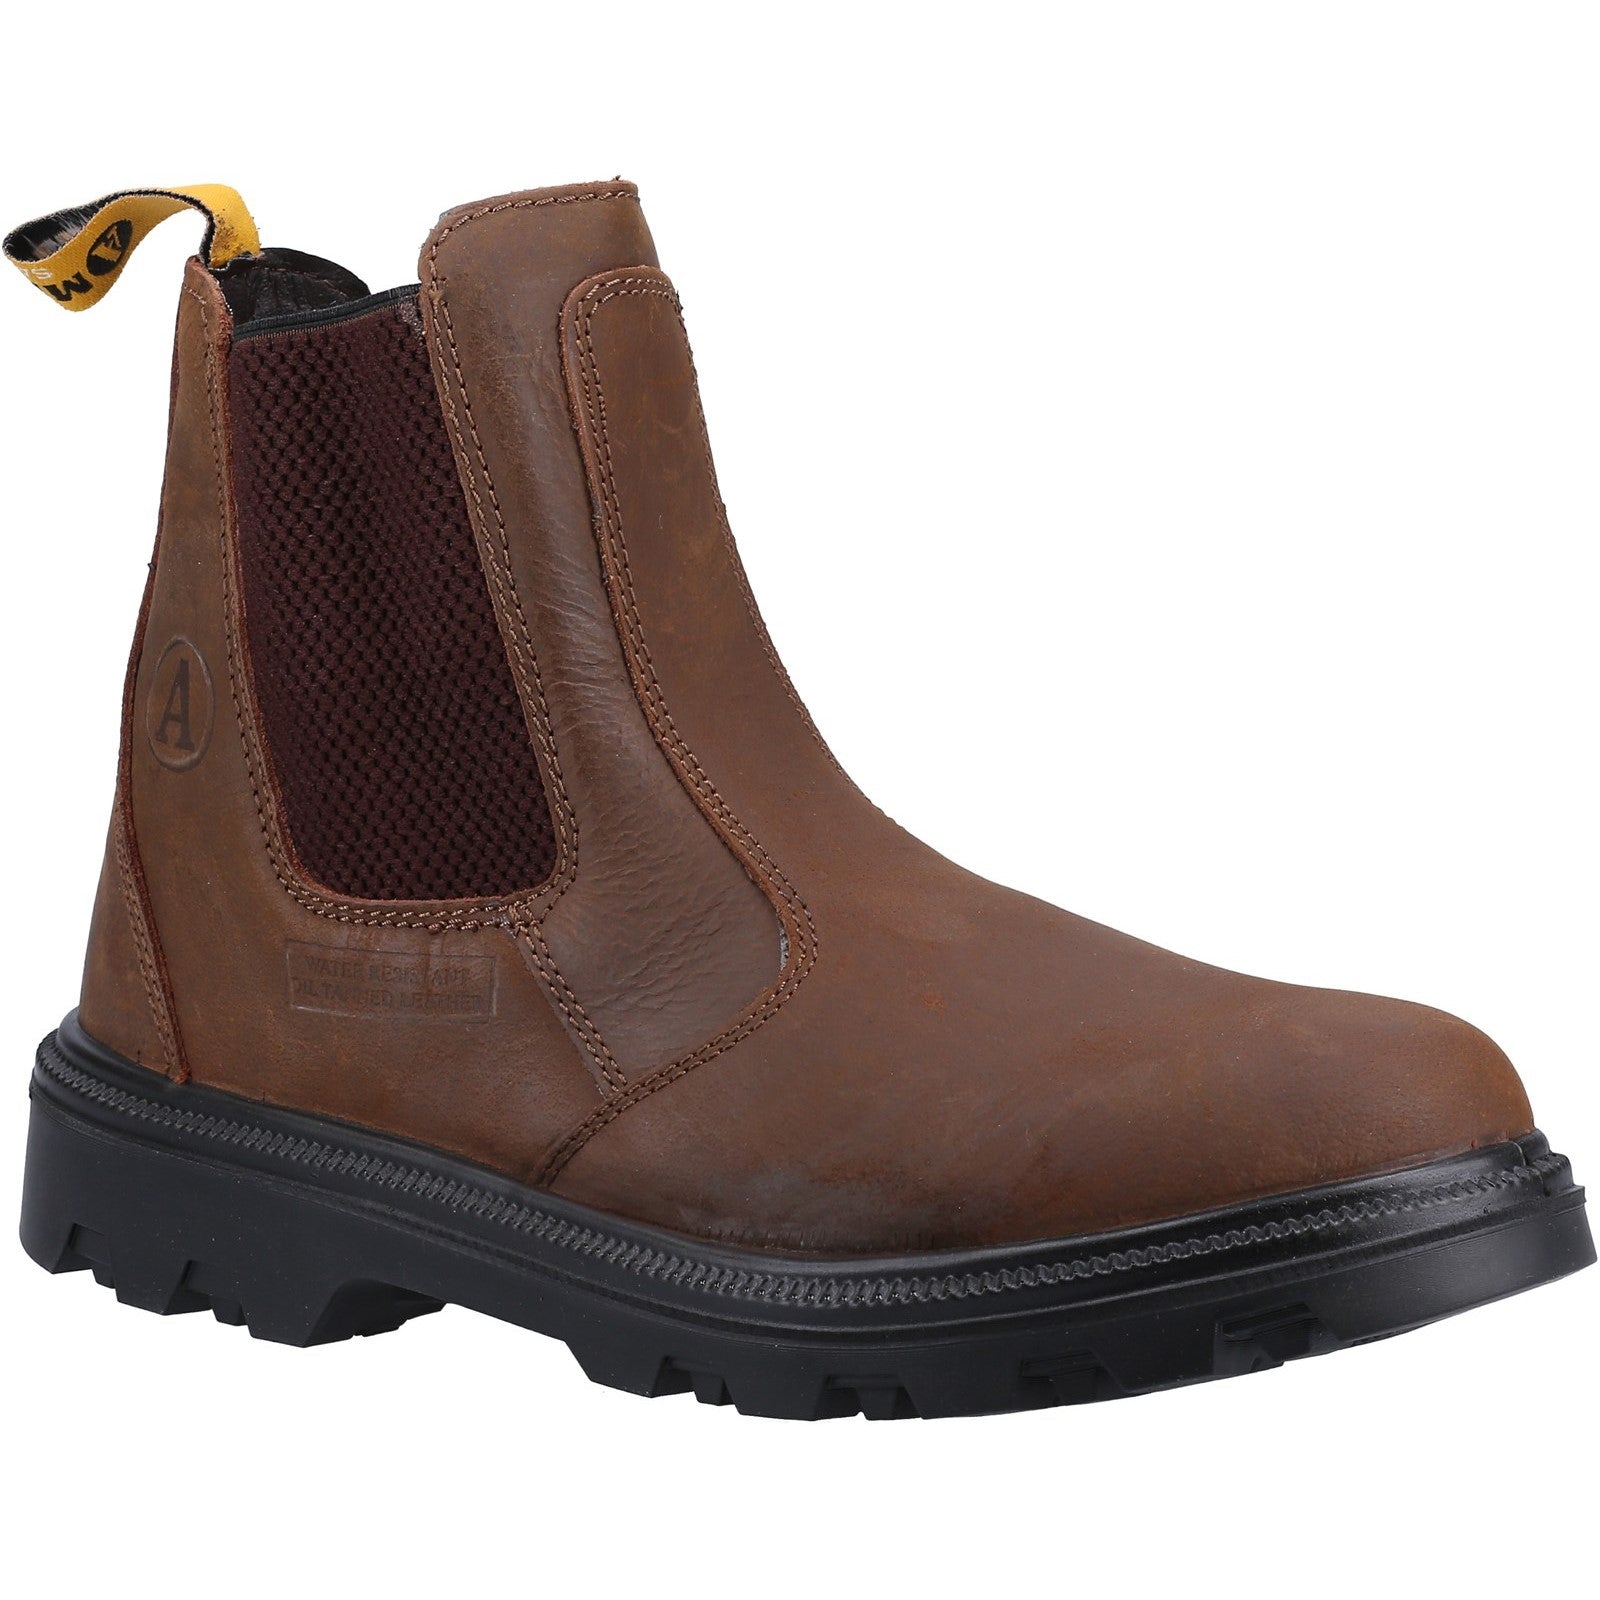 FS131 Water Resistant Pull on Safety Dealer Boot, Amblers Safety